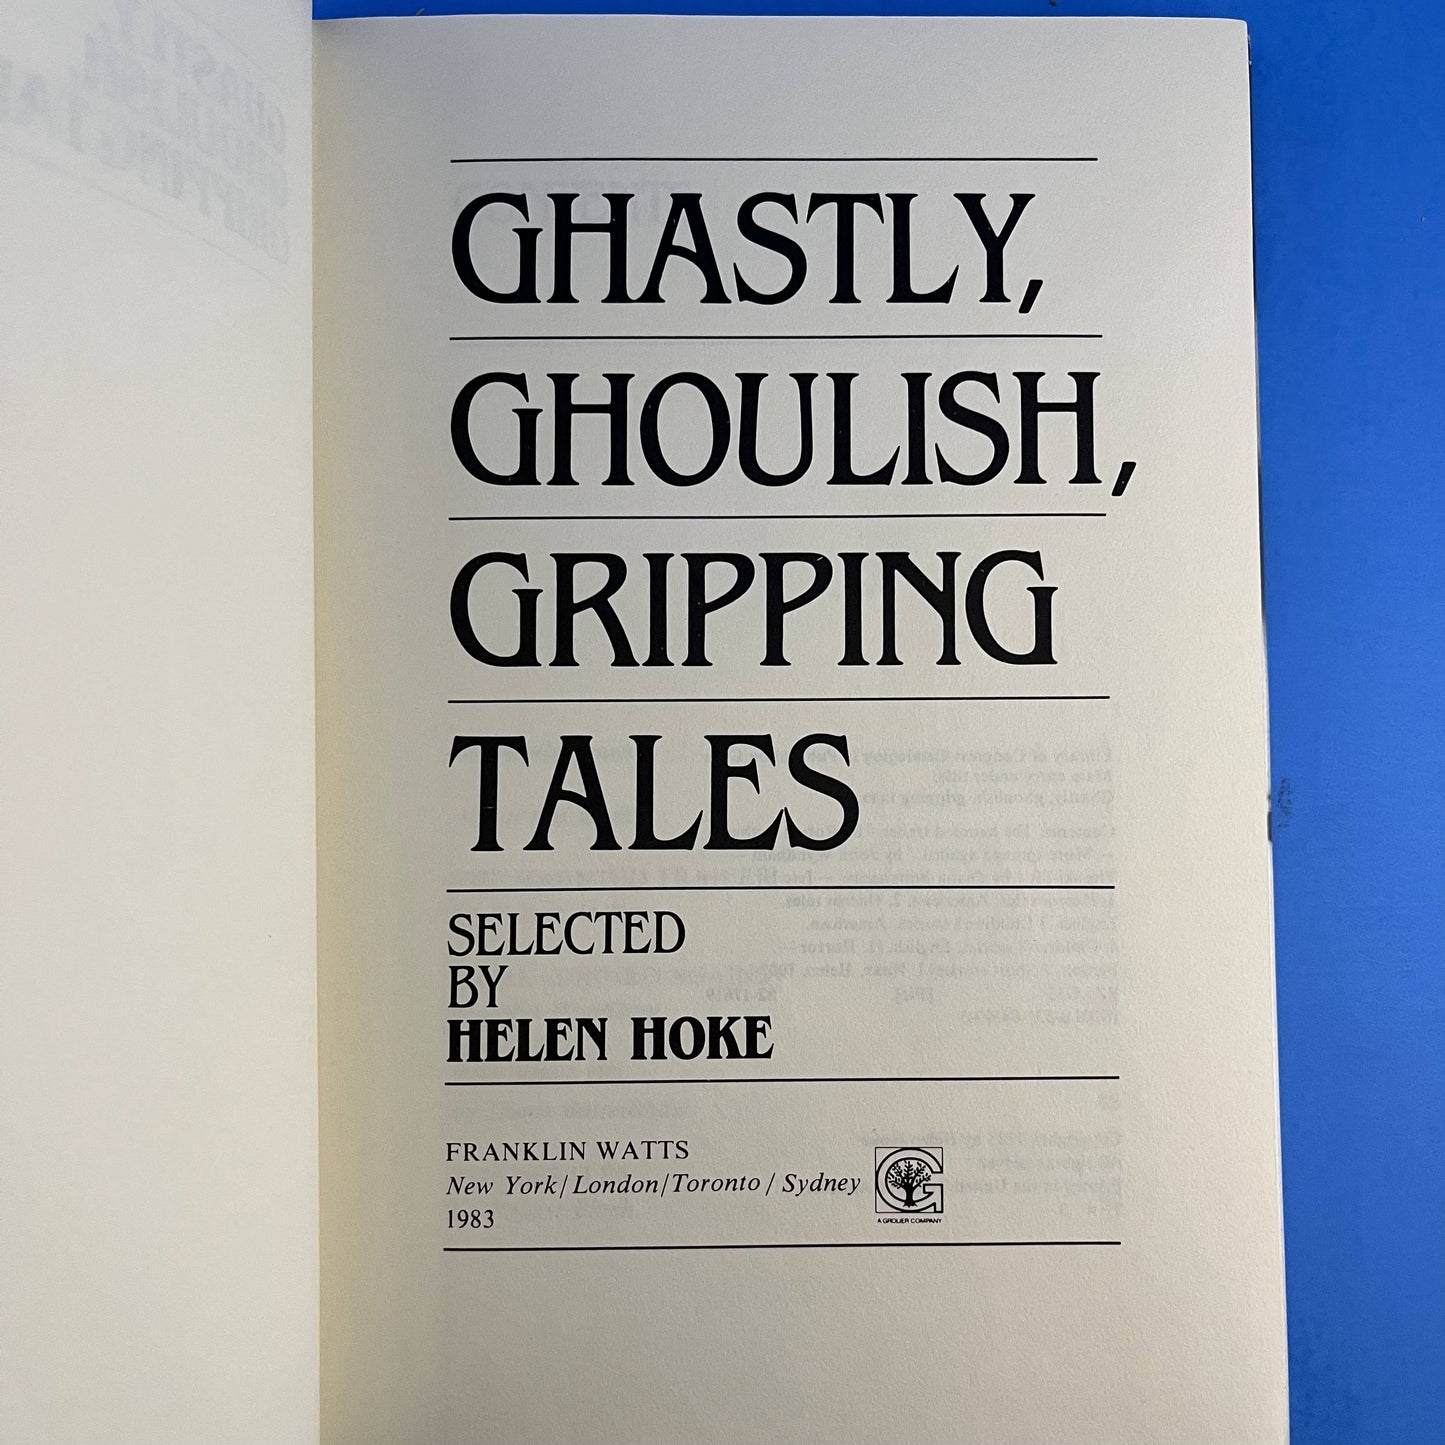 Ghastly, Ghoulish, Gripping Tales